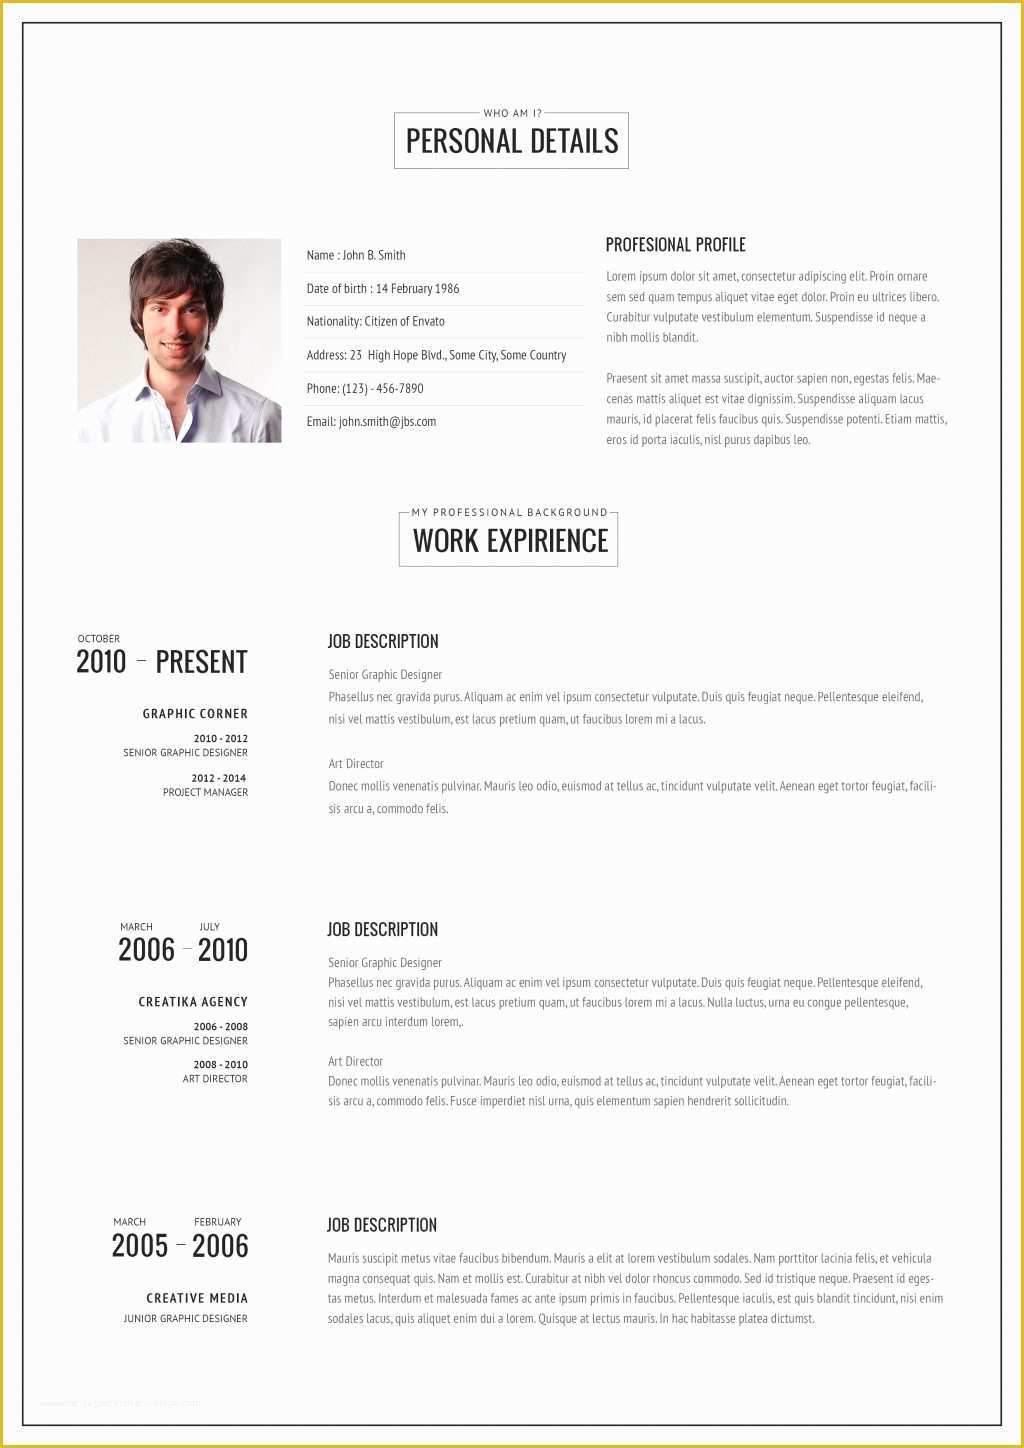 Mac Pages Templates Free Download Of Resume and Template Remarkable Mac Pages Resume Templates